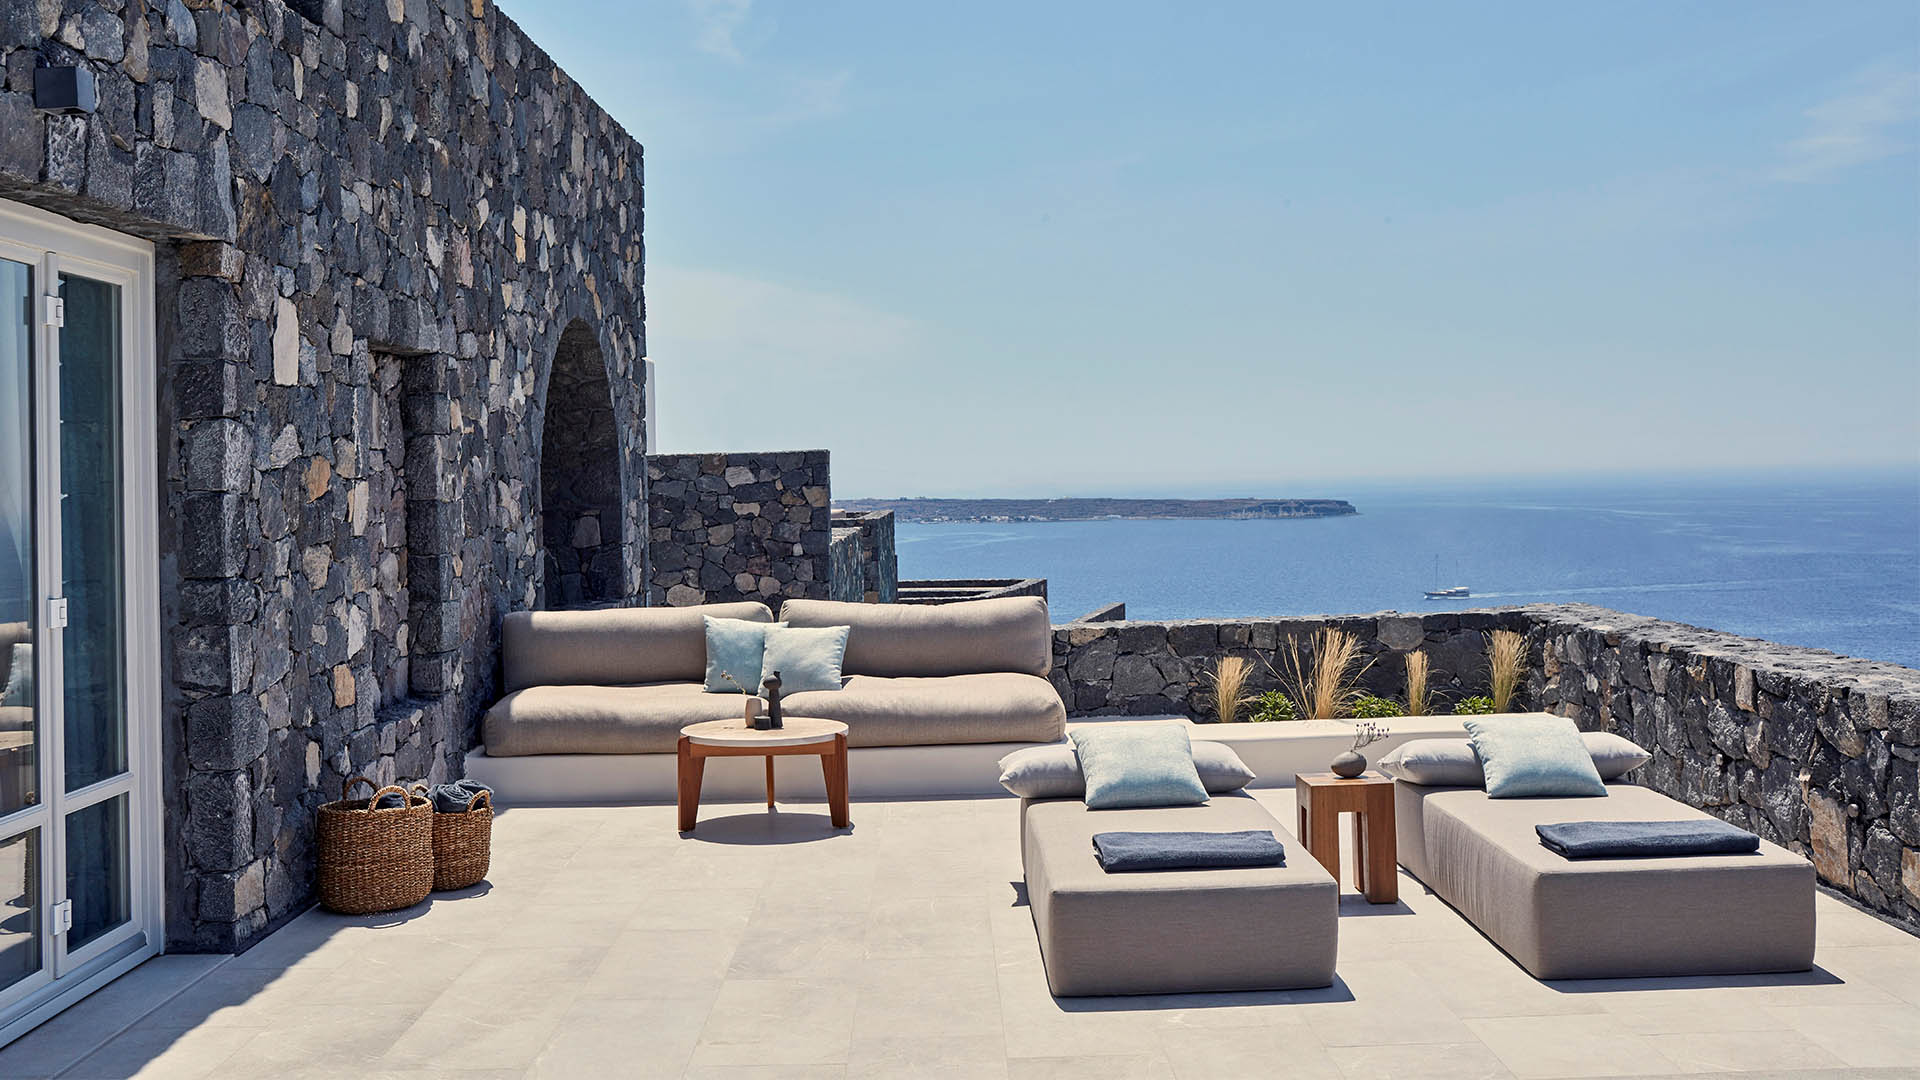 The best sea view hotel rooms in the Greek islands